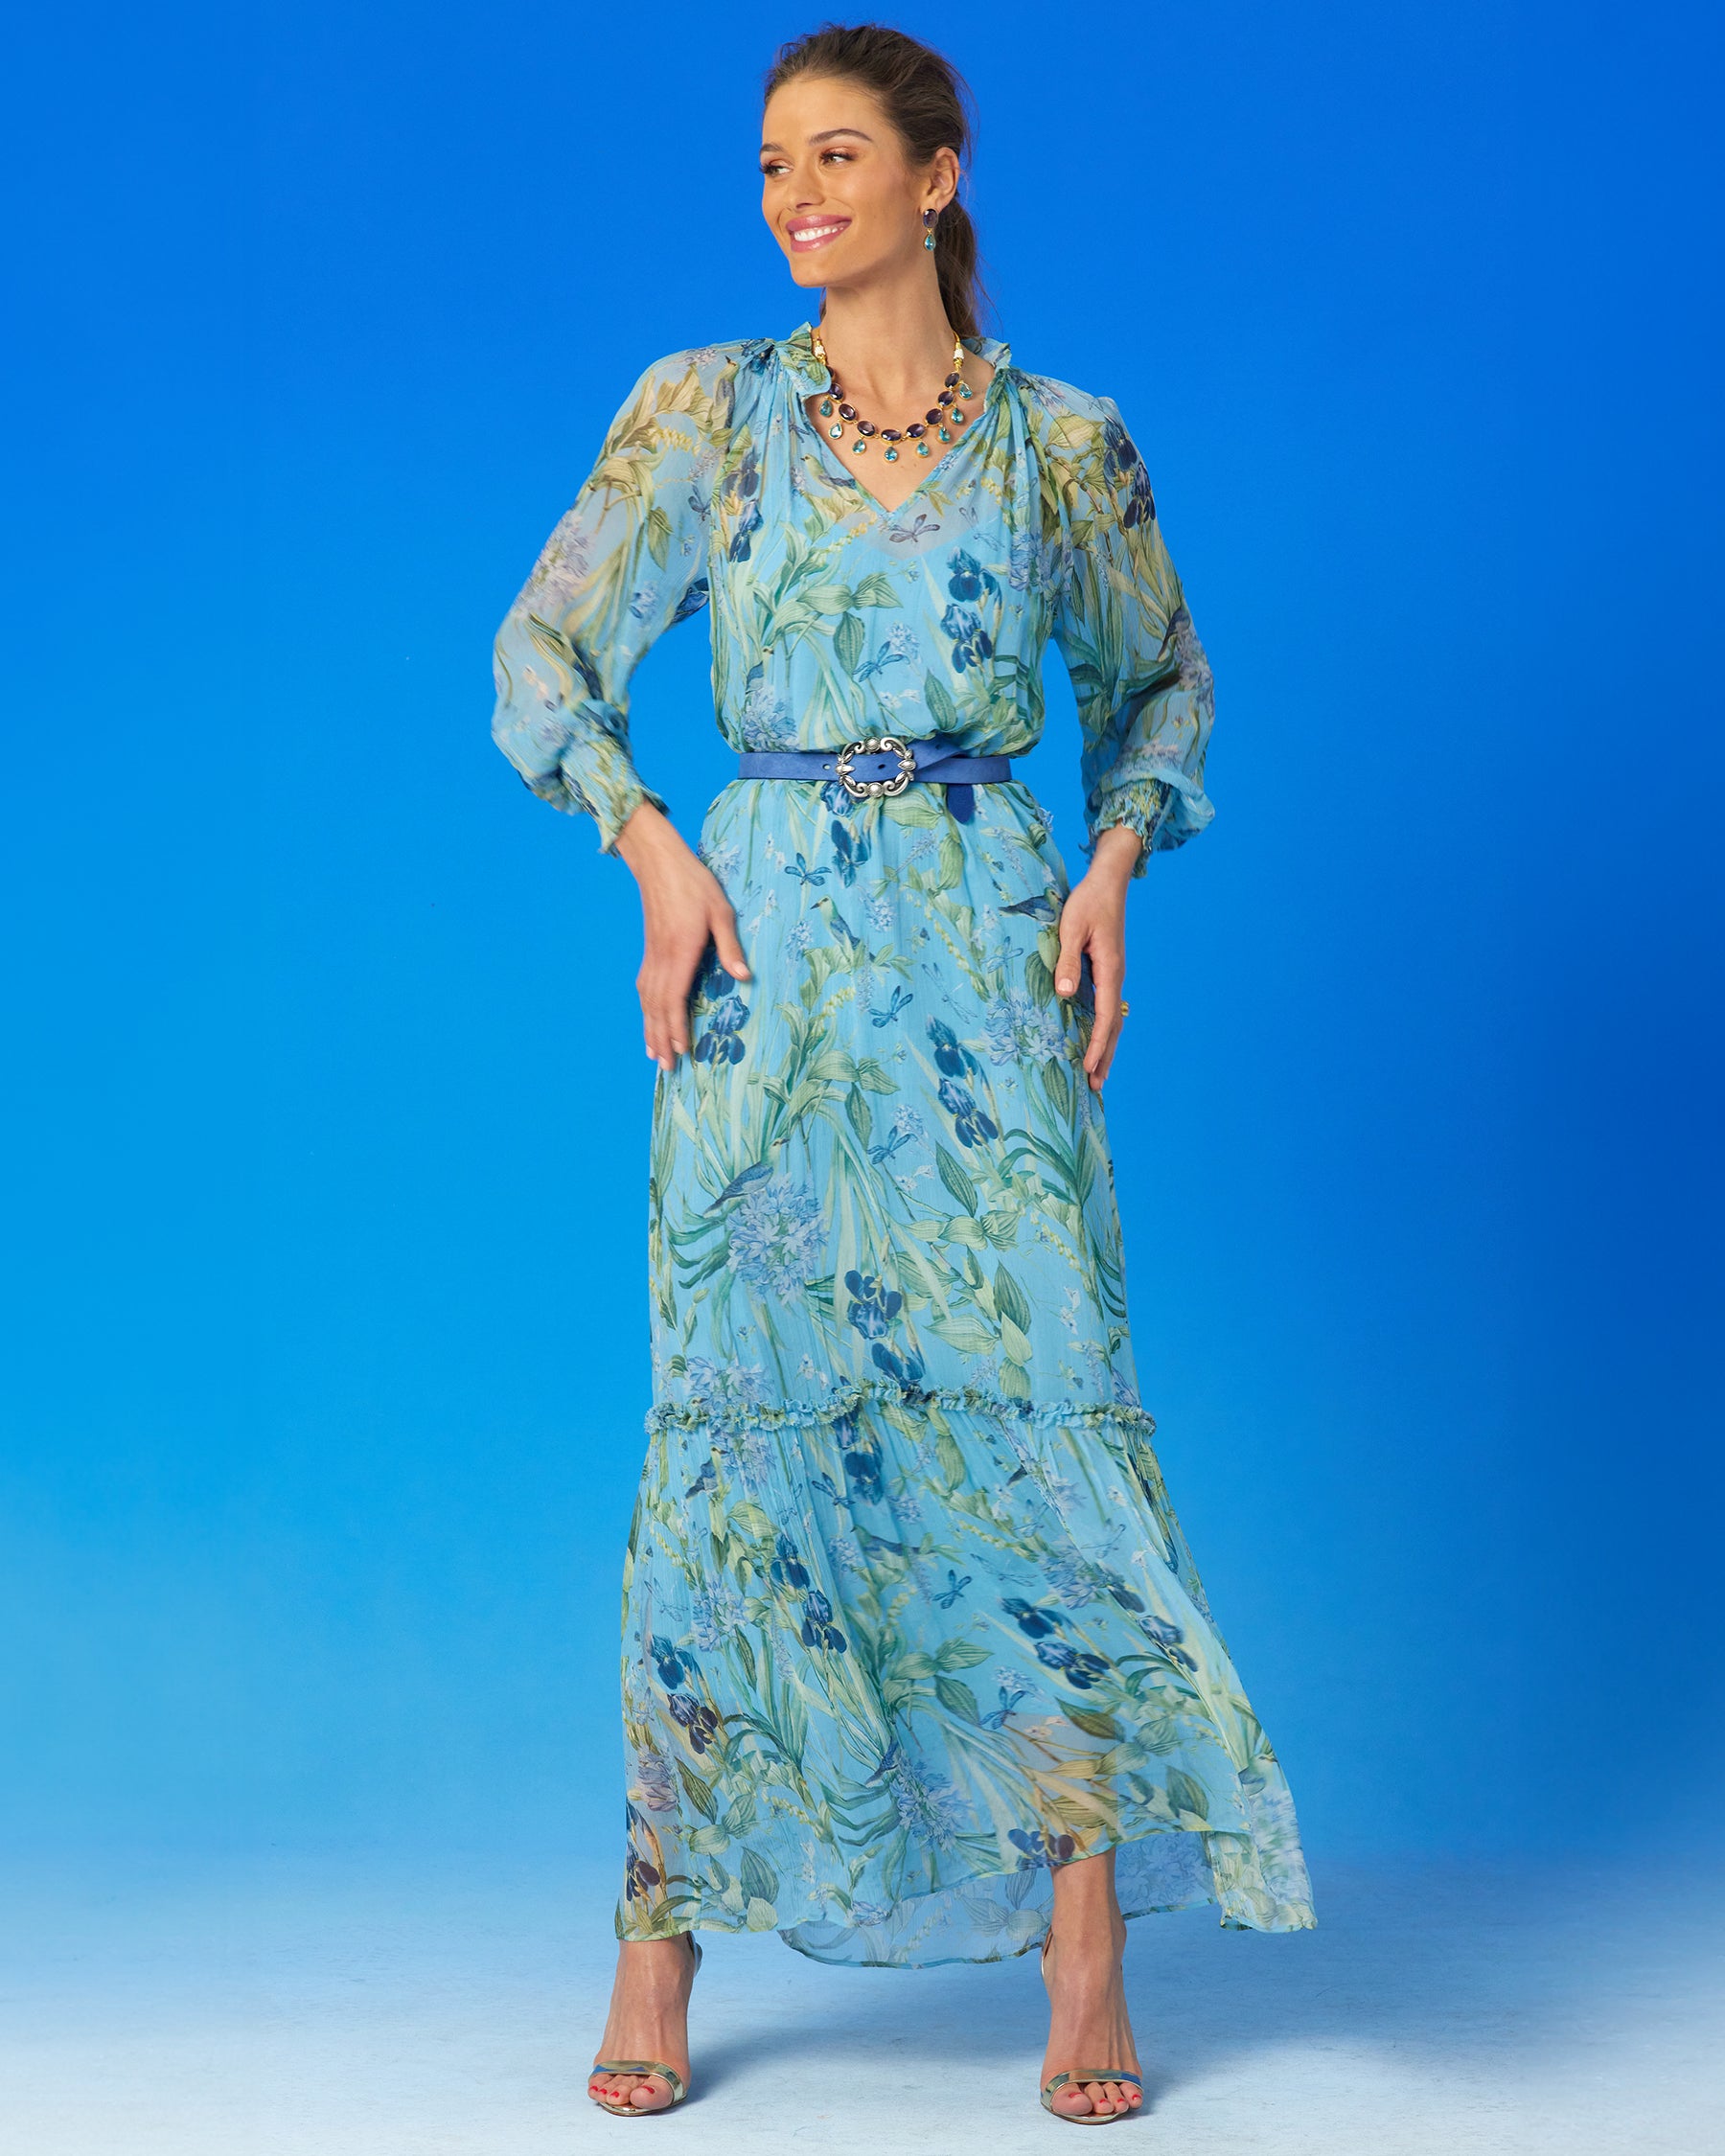 Celine Maxi Crinkle Chiffon Dress in Magical Garden-Full length view with waist cinched with the Blair Belt in Indigo Blue